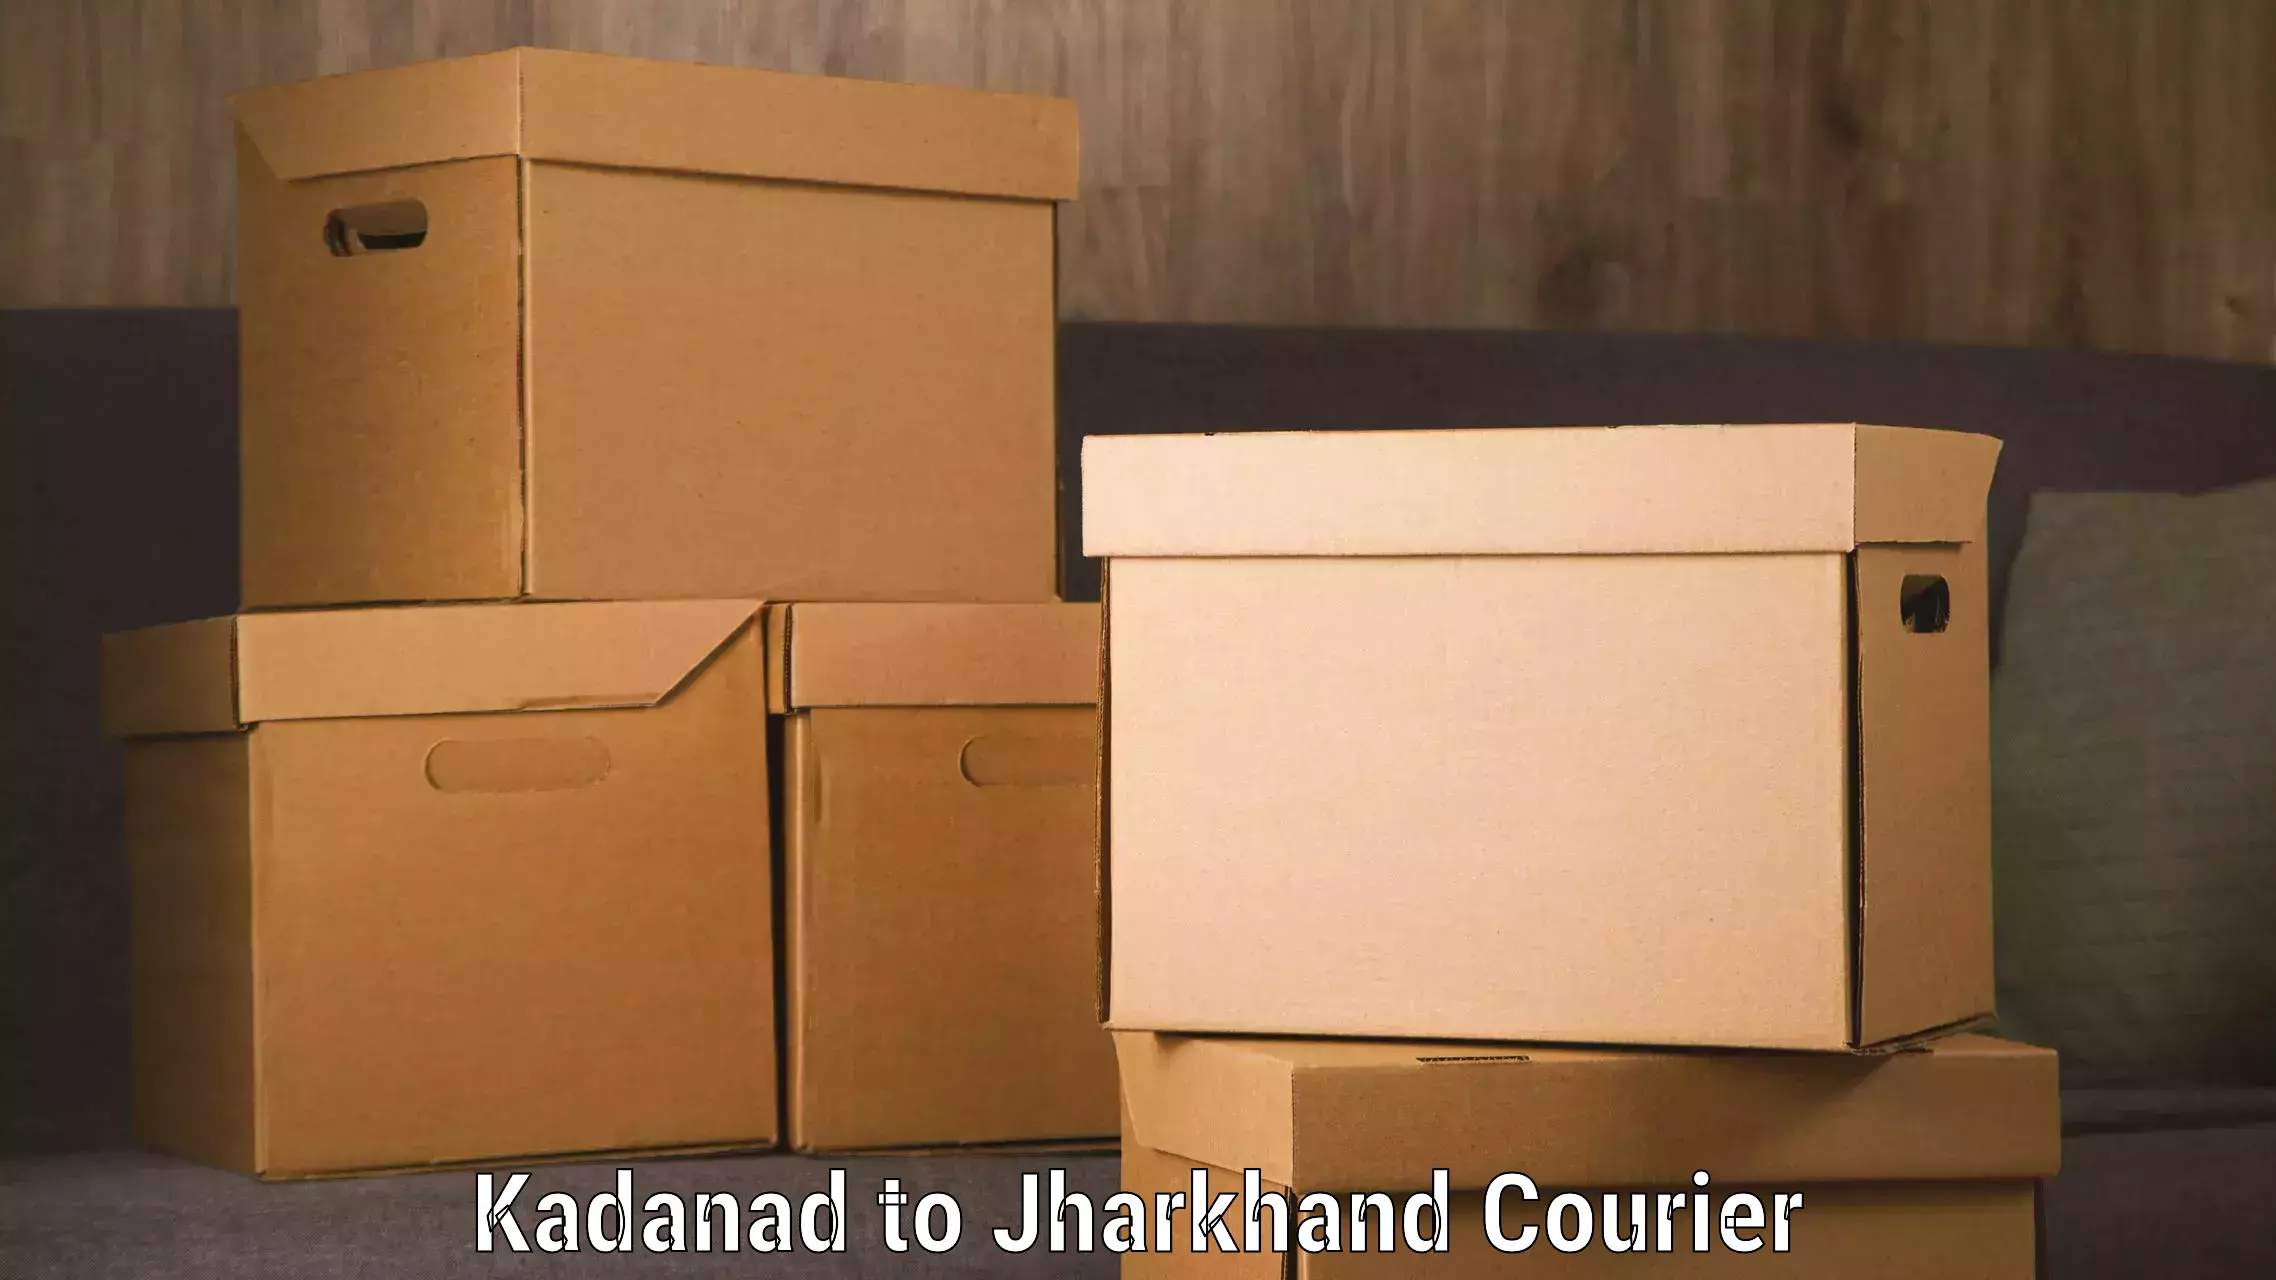 Package delivery network Kadanad to Godda